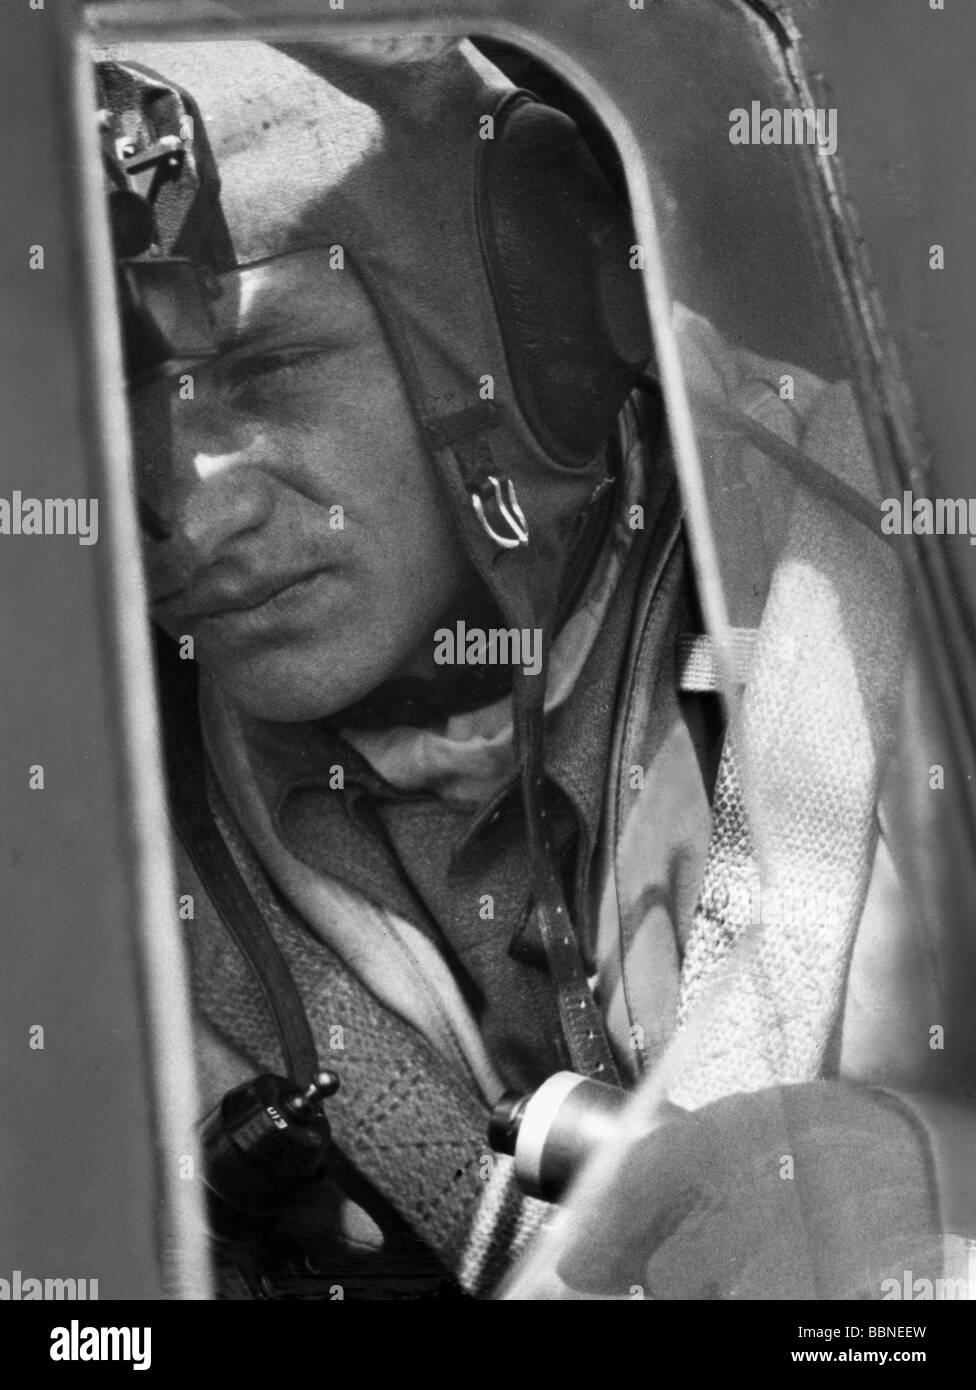 events, Second World War / WWII, aerial warfare, aircraft, details / interiors, pilot of a German bomber Dornier Do 217 looking through the dive bombing sight, Holland, 30.6.1942, 20th century, historic, historical, Do217, Do-217, bombers, Luftwaffe, Wehrmacht, Germany, Third Reich, plane, planes, Stuvi, flying cap, soldier, soldiers, aviator, aviators, people, 1940s, Stock Photo